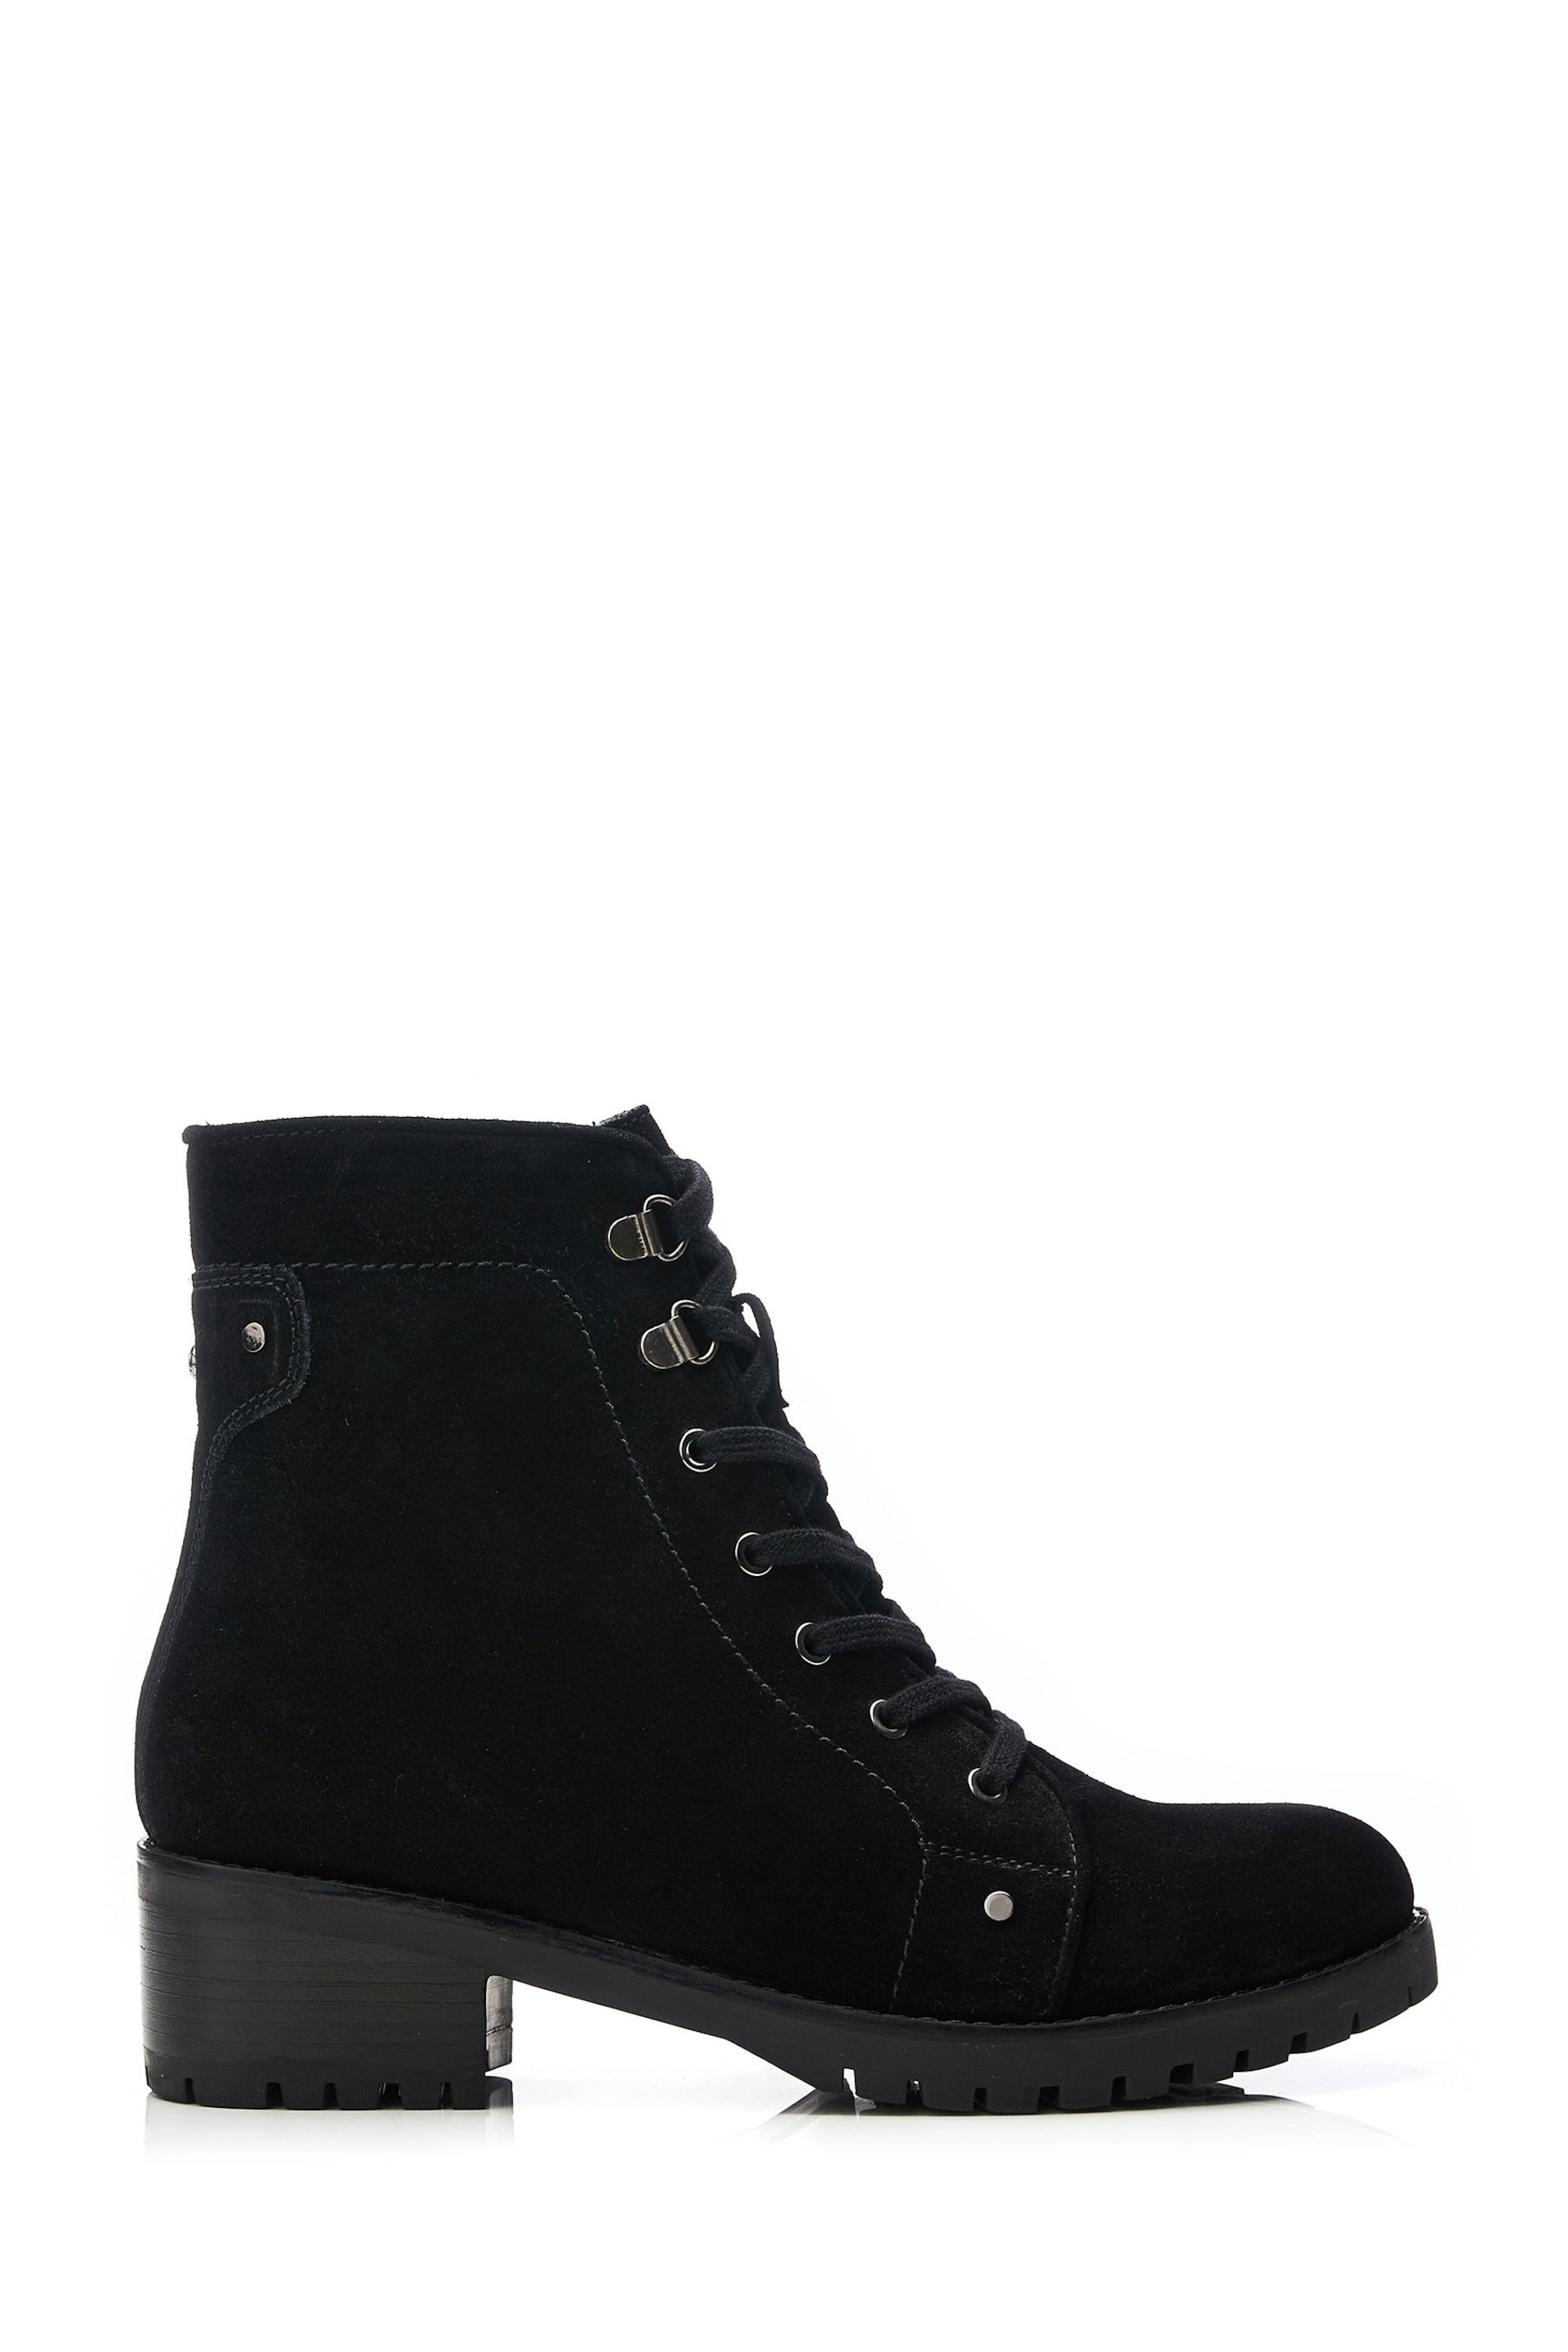 Moda in Pelle Batilda Cleated Lace up Hiker Black Boots - Image 1 of 4